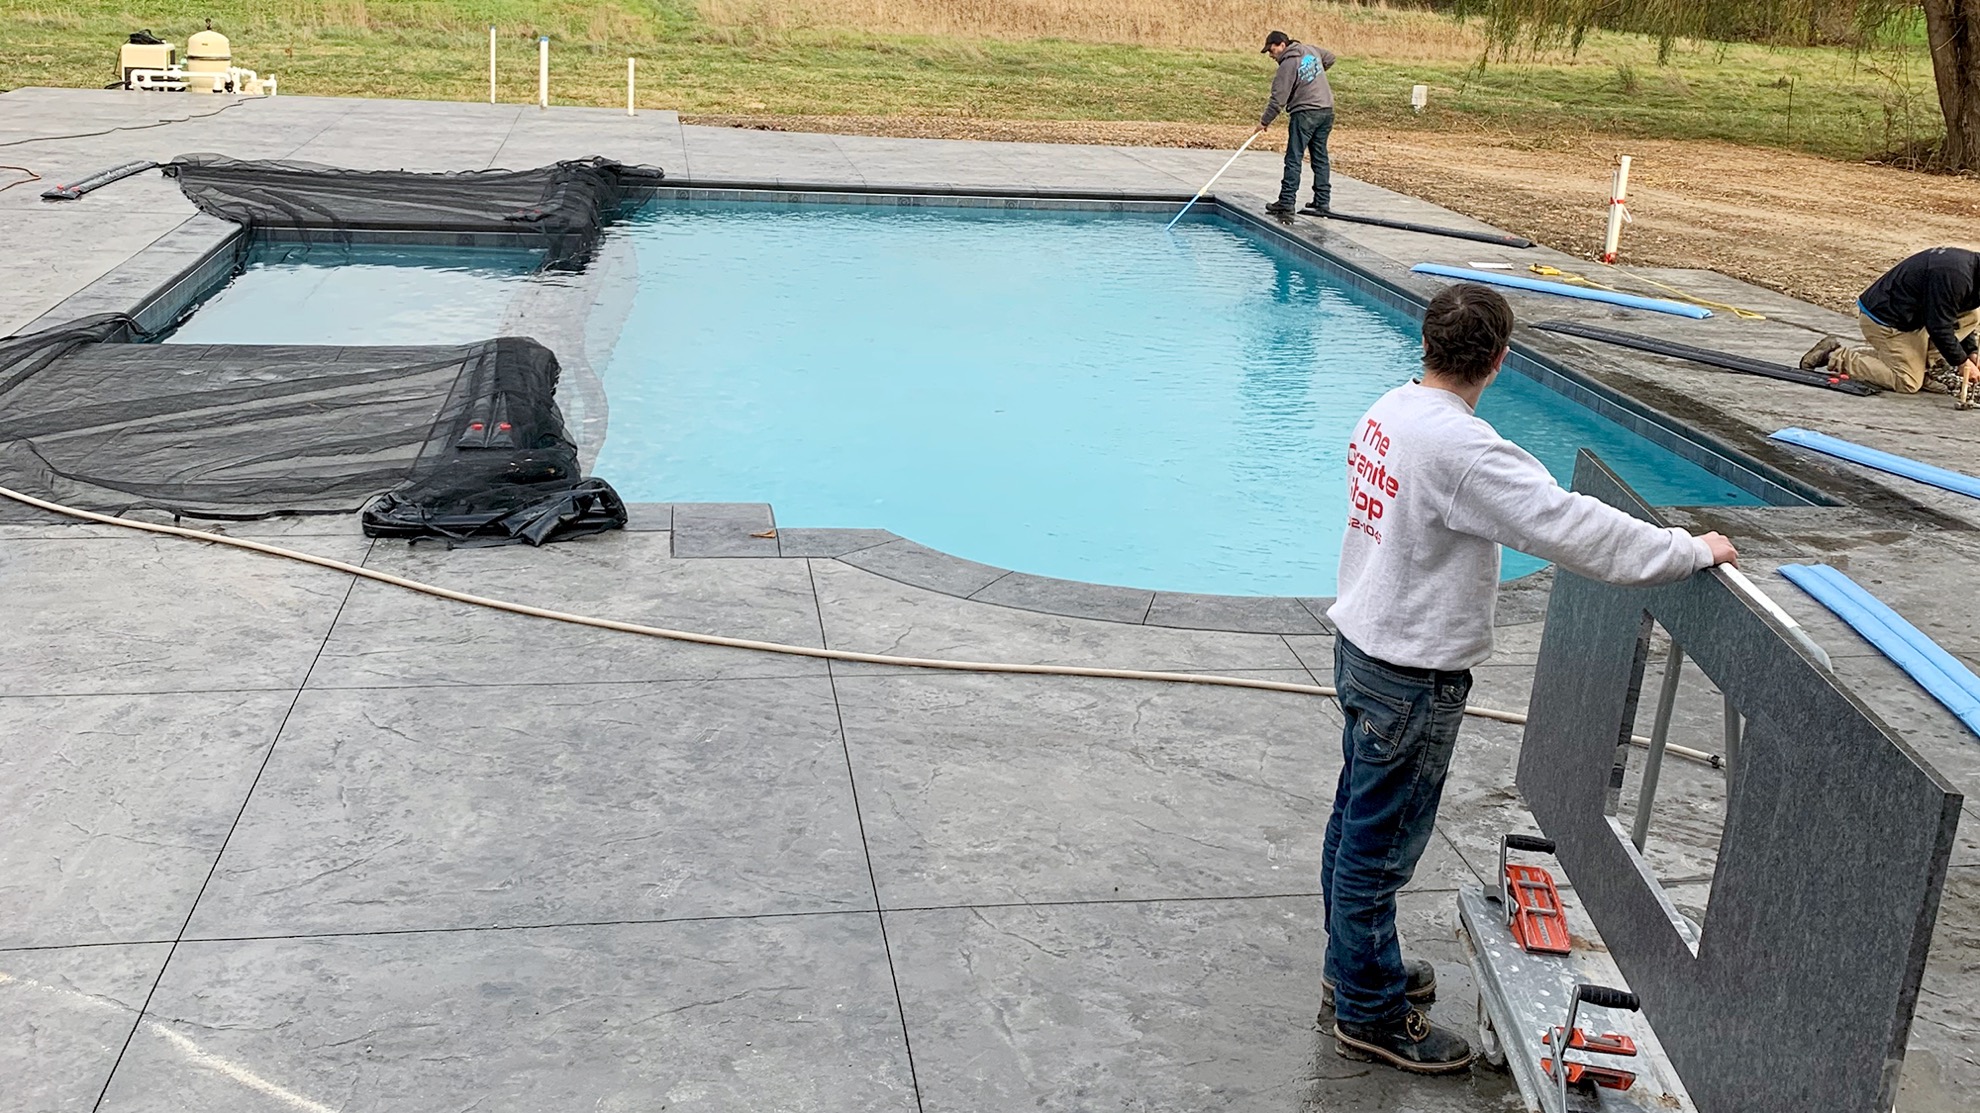 2 techs completing maintenance on above ground pool